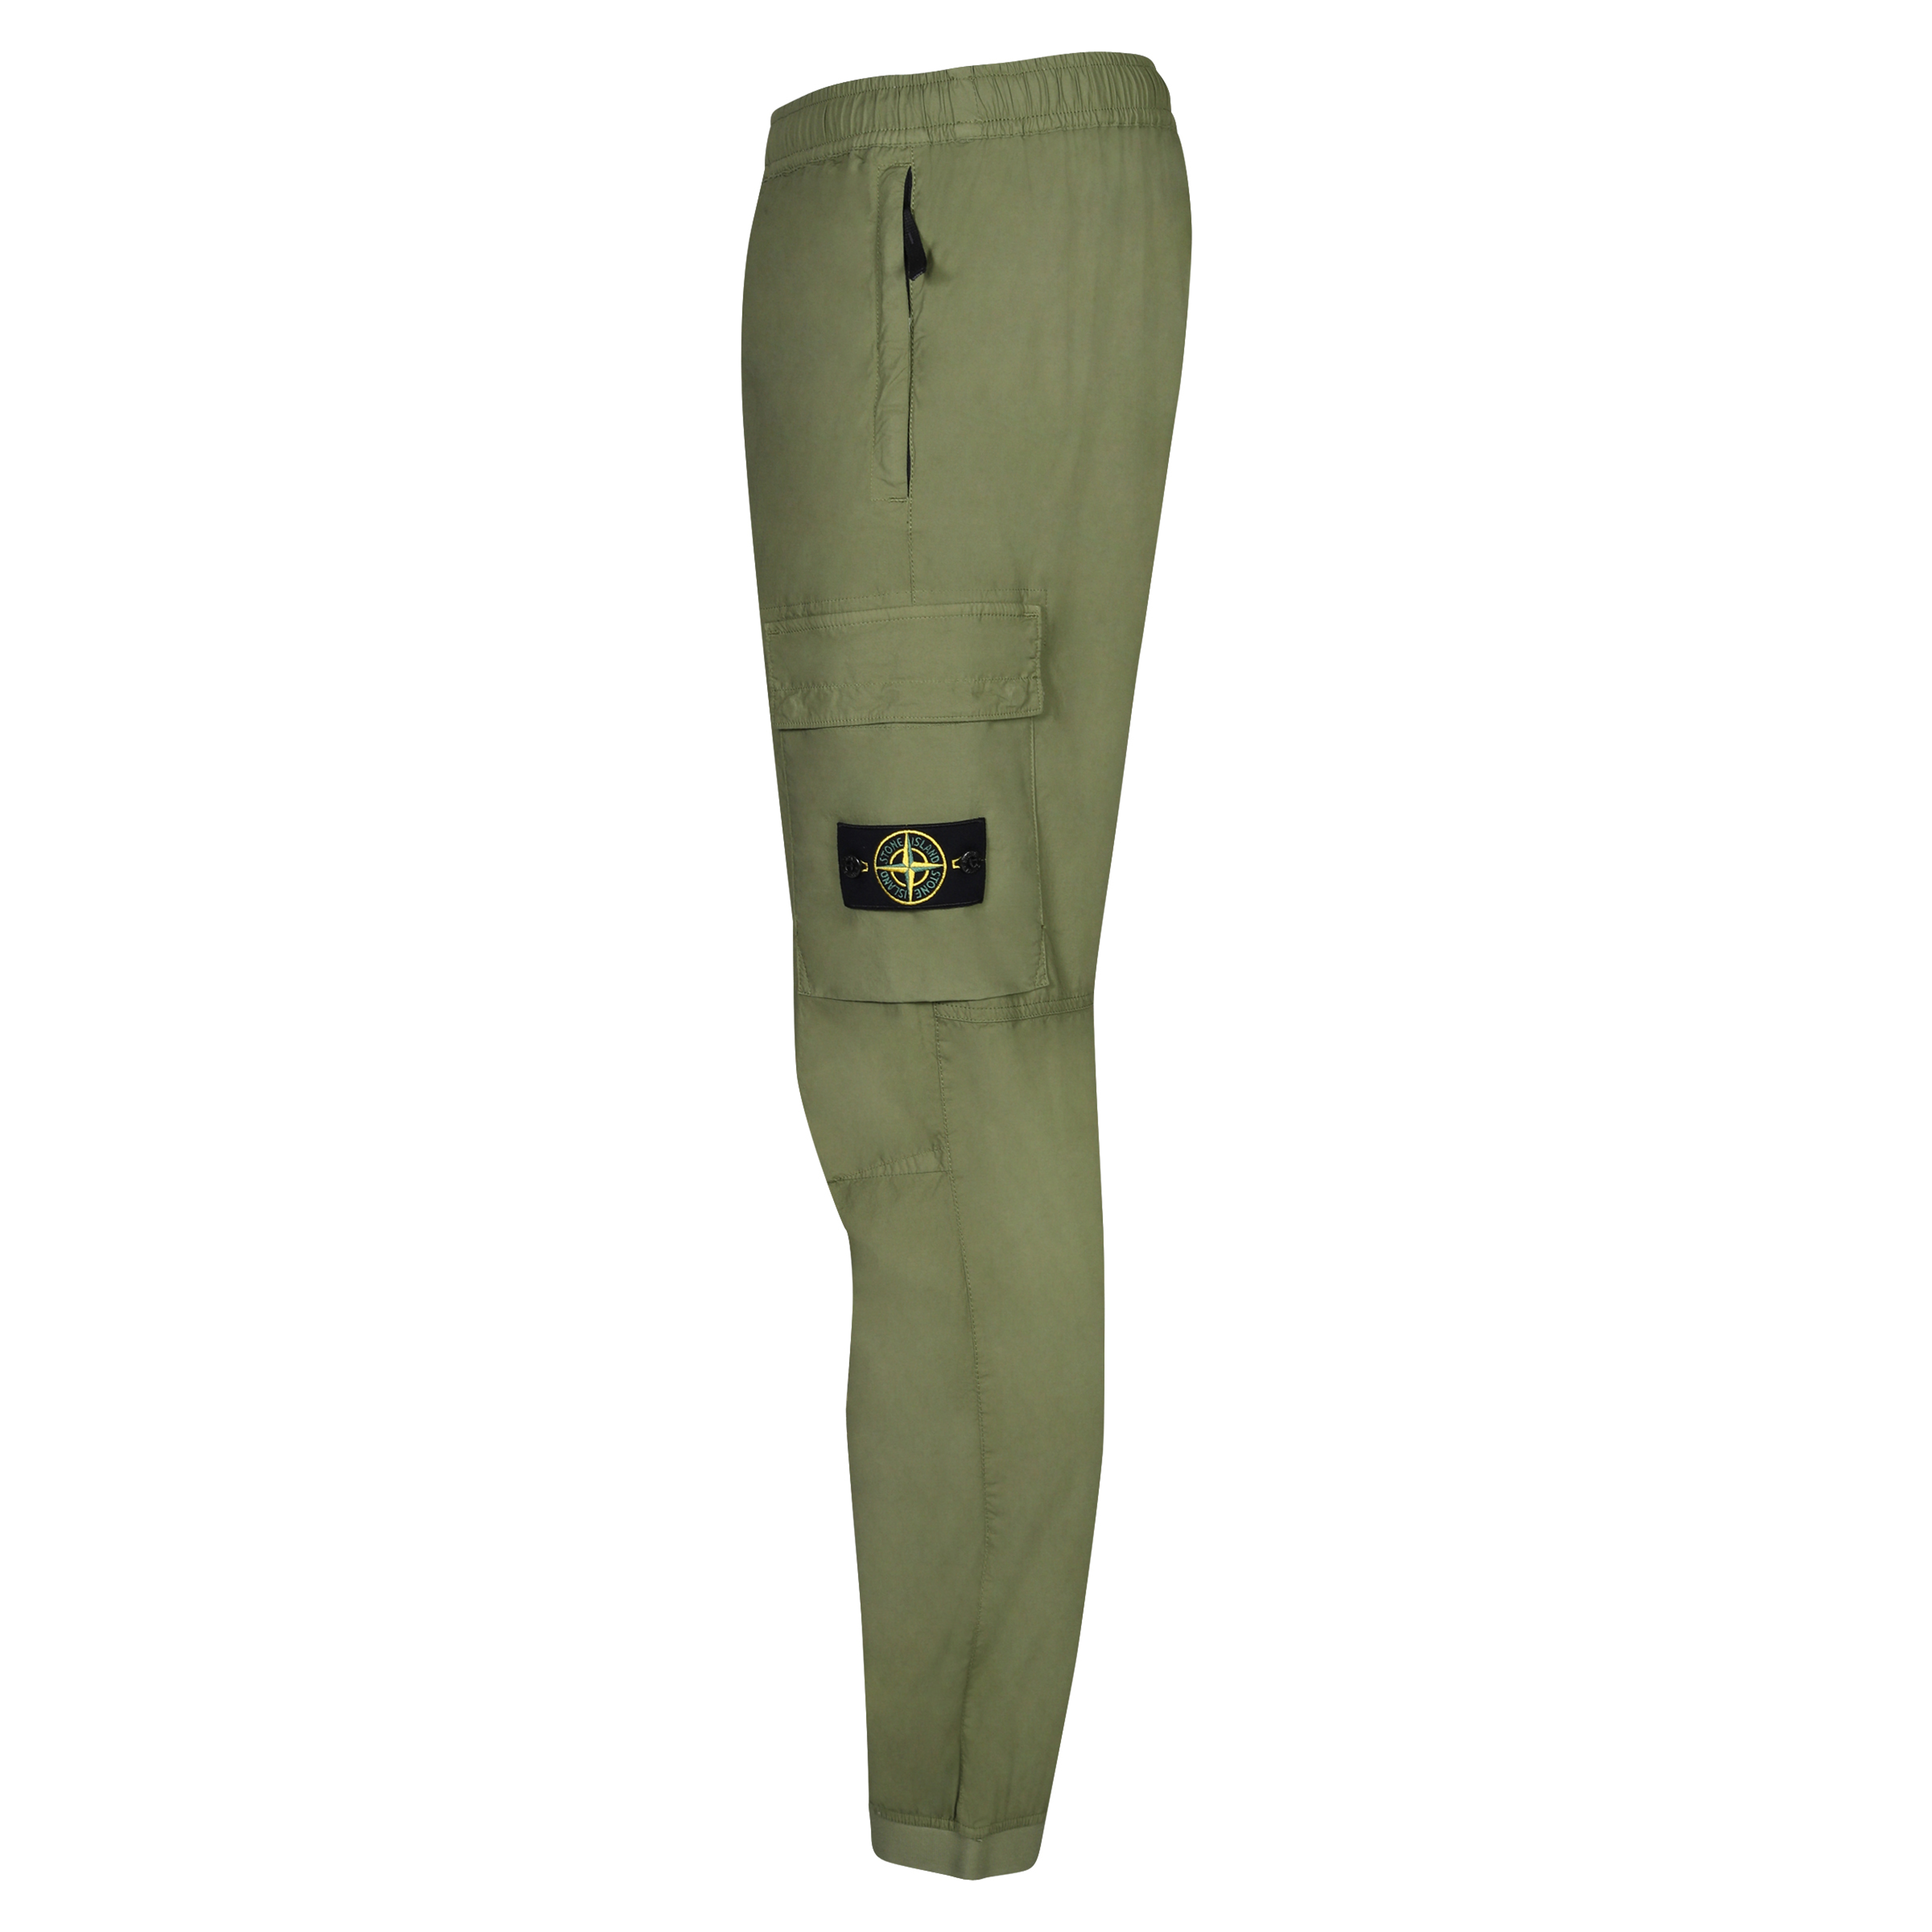 Stone Island Light Cargo Pant in Olive 31